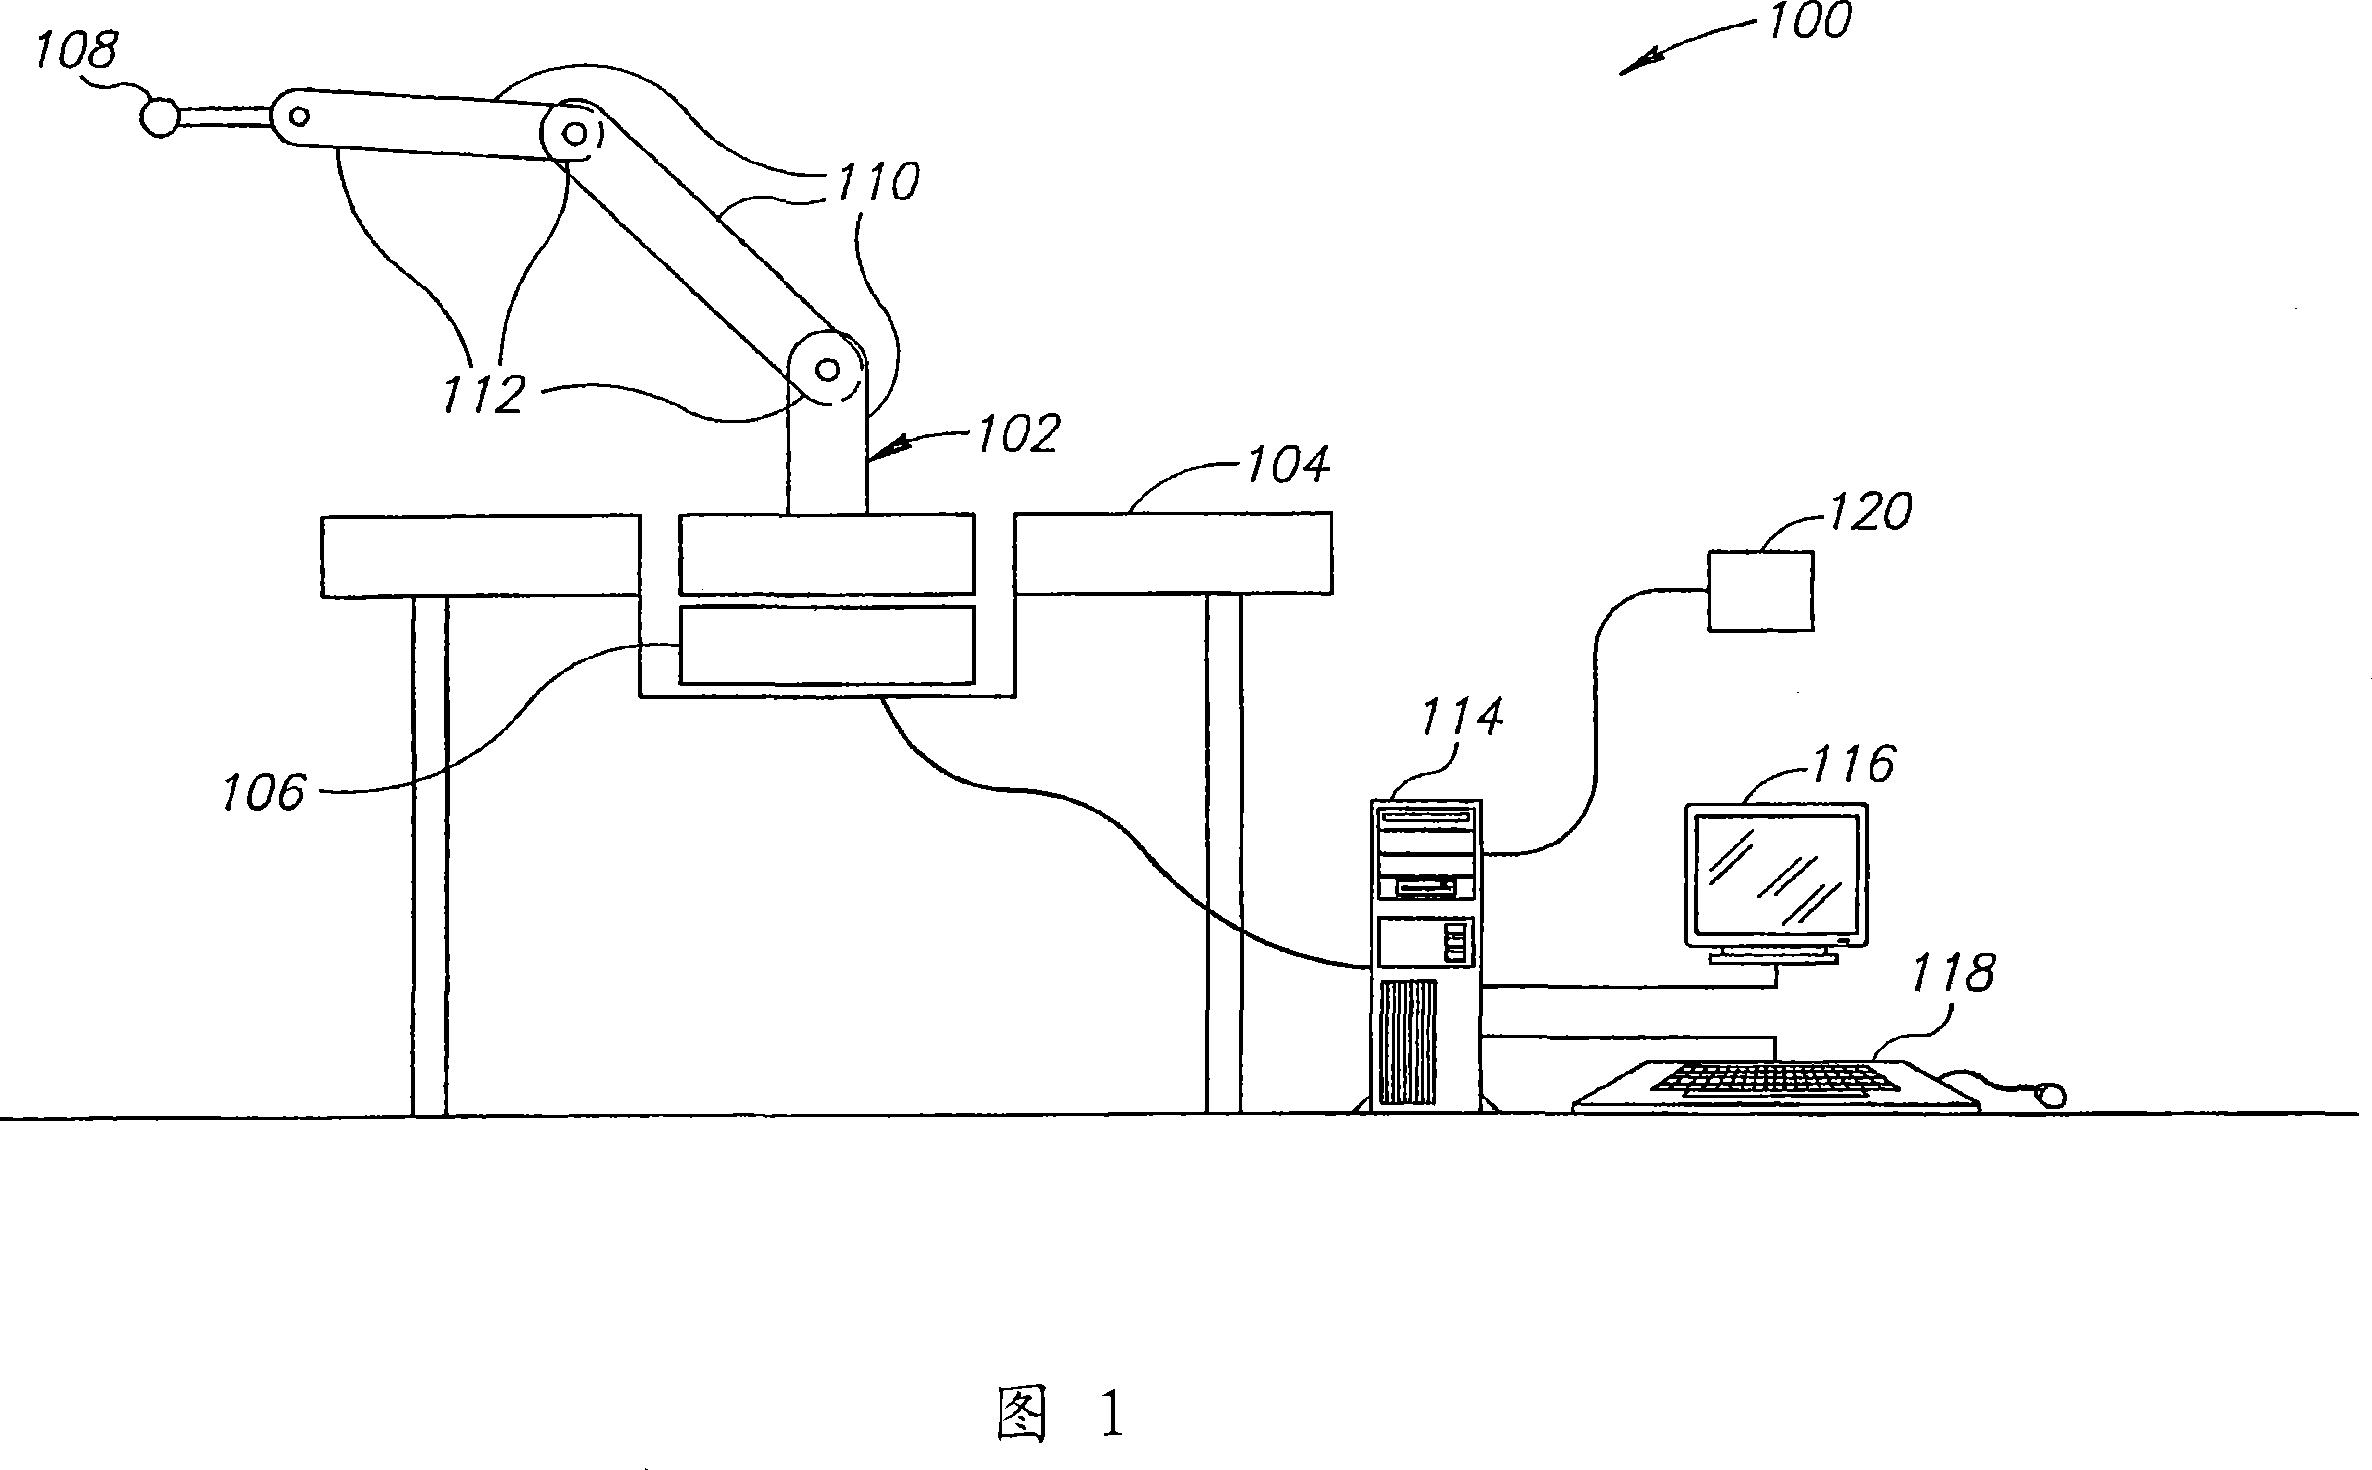 Methods and apparatus for rehabilitation and training